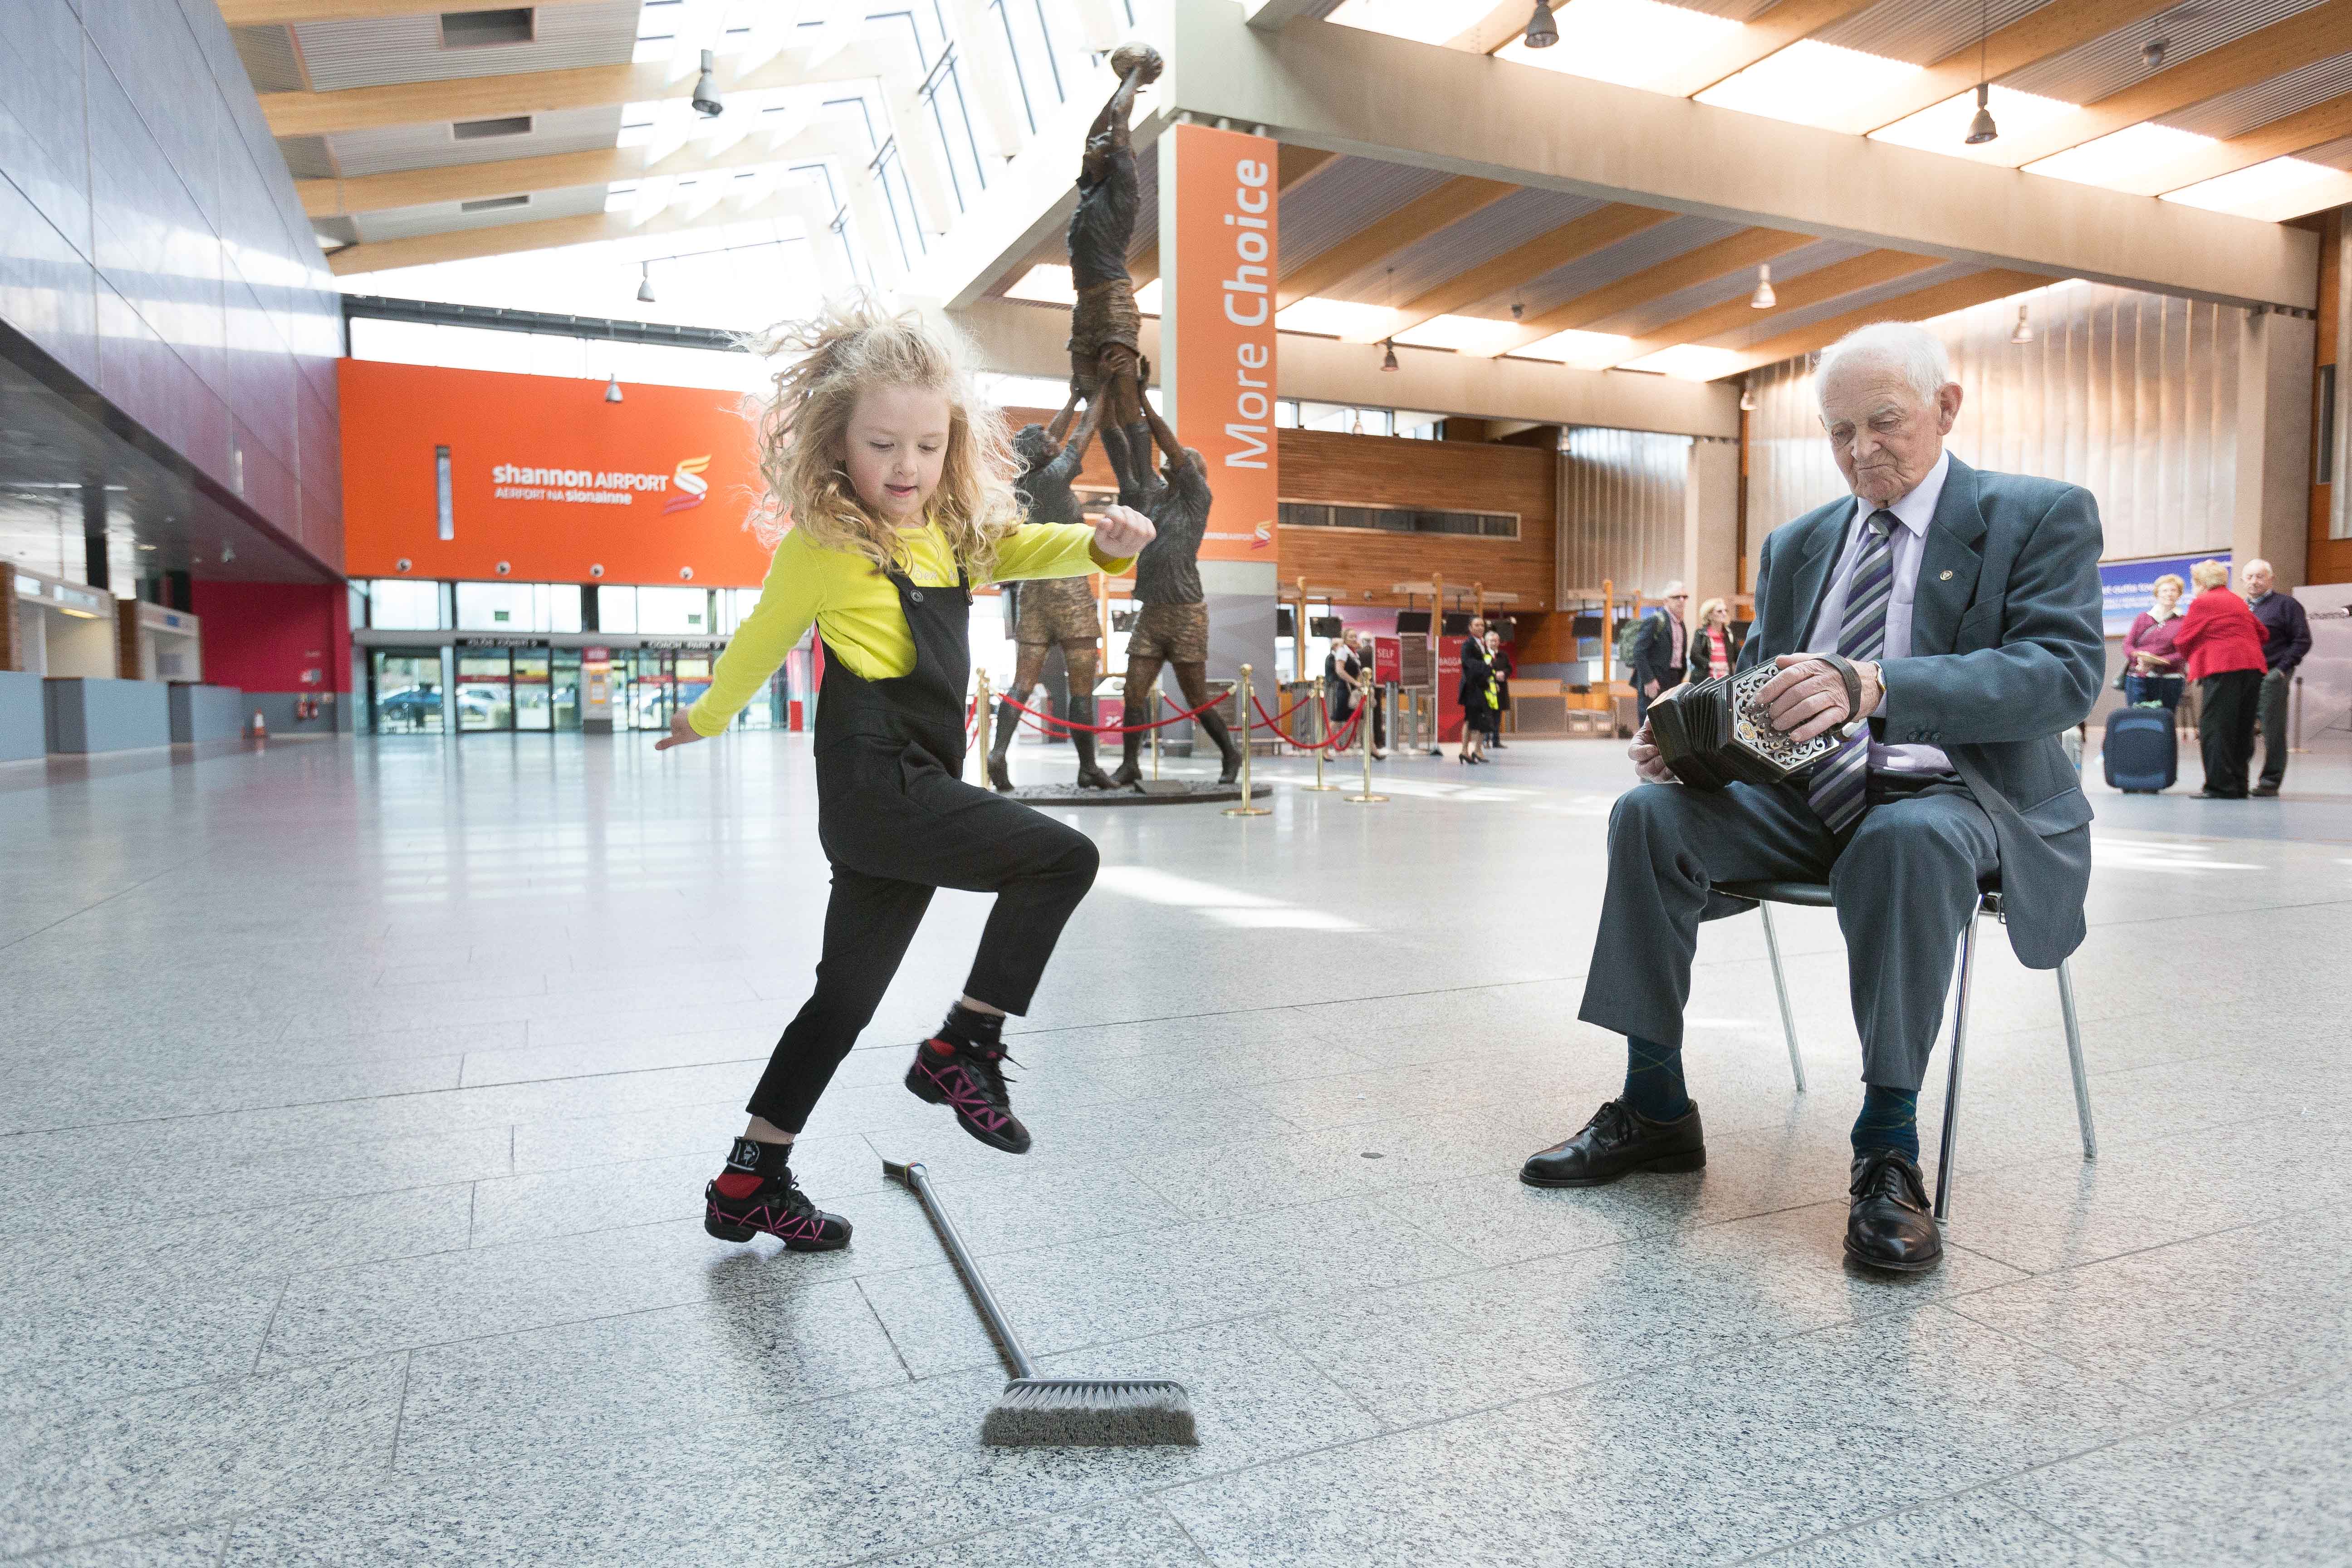 **NO REPRO FEE** 26042016 Fleadh Cheoil na hÉireann Inis 2016 lifts off as Shannon Airport comes on board as main sponsor. At the announcement were Emilie Keane (aged 5) performing a brush dance to the music of renouned concertina player Chris Droney. Photograph by Eamon Ward (Further information available from Eugene Hogan 0872497290 eugene.hogan@bridgepr.ie)